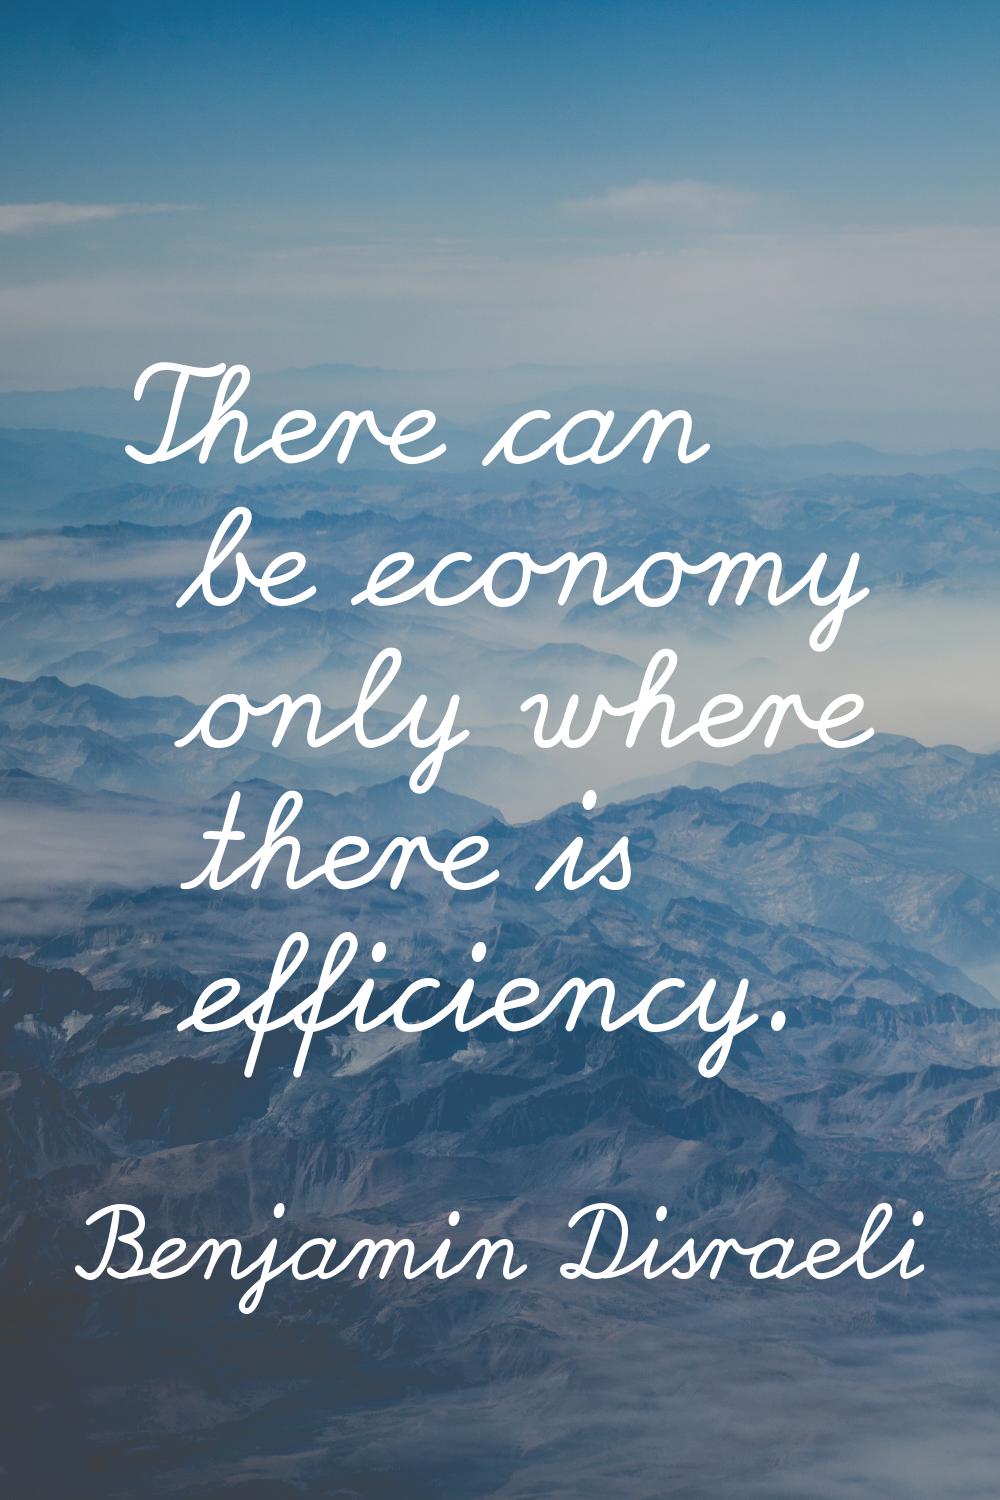 There can be economy only where there is efficiency.